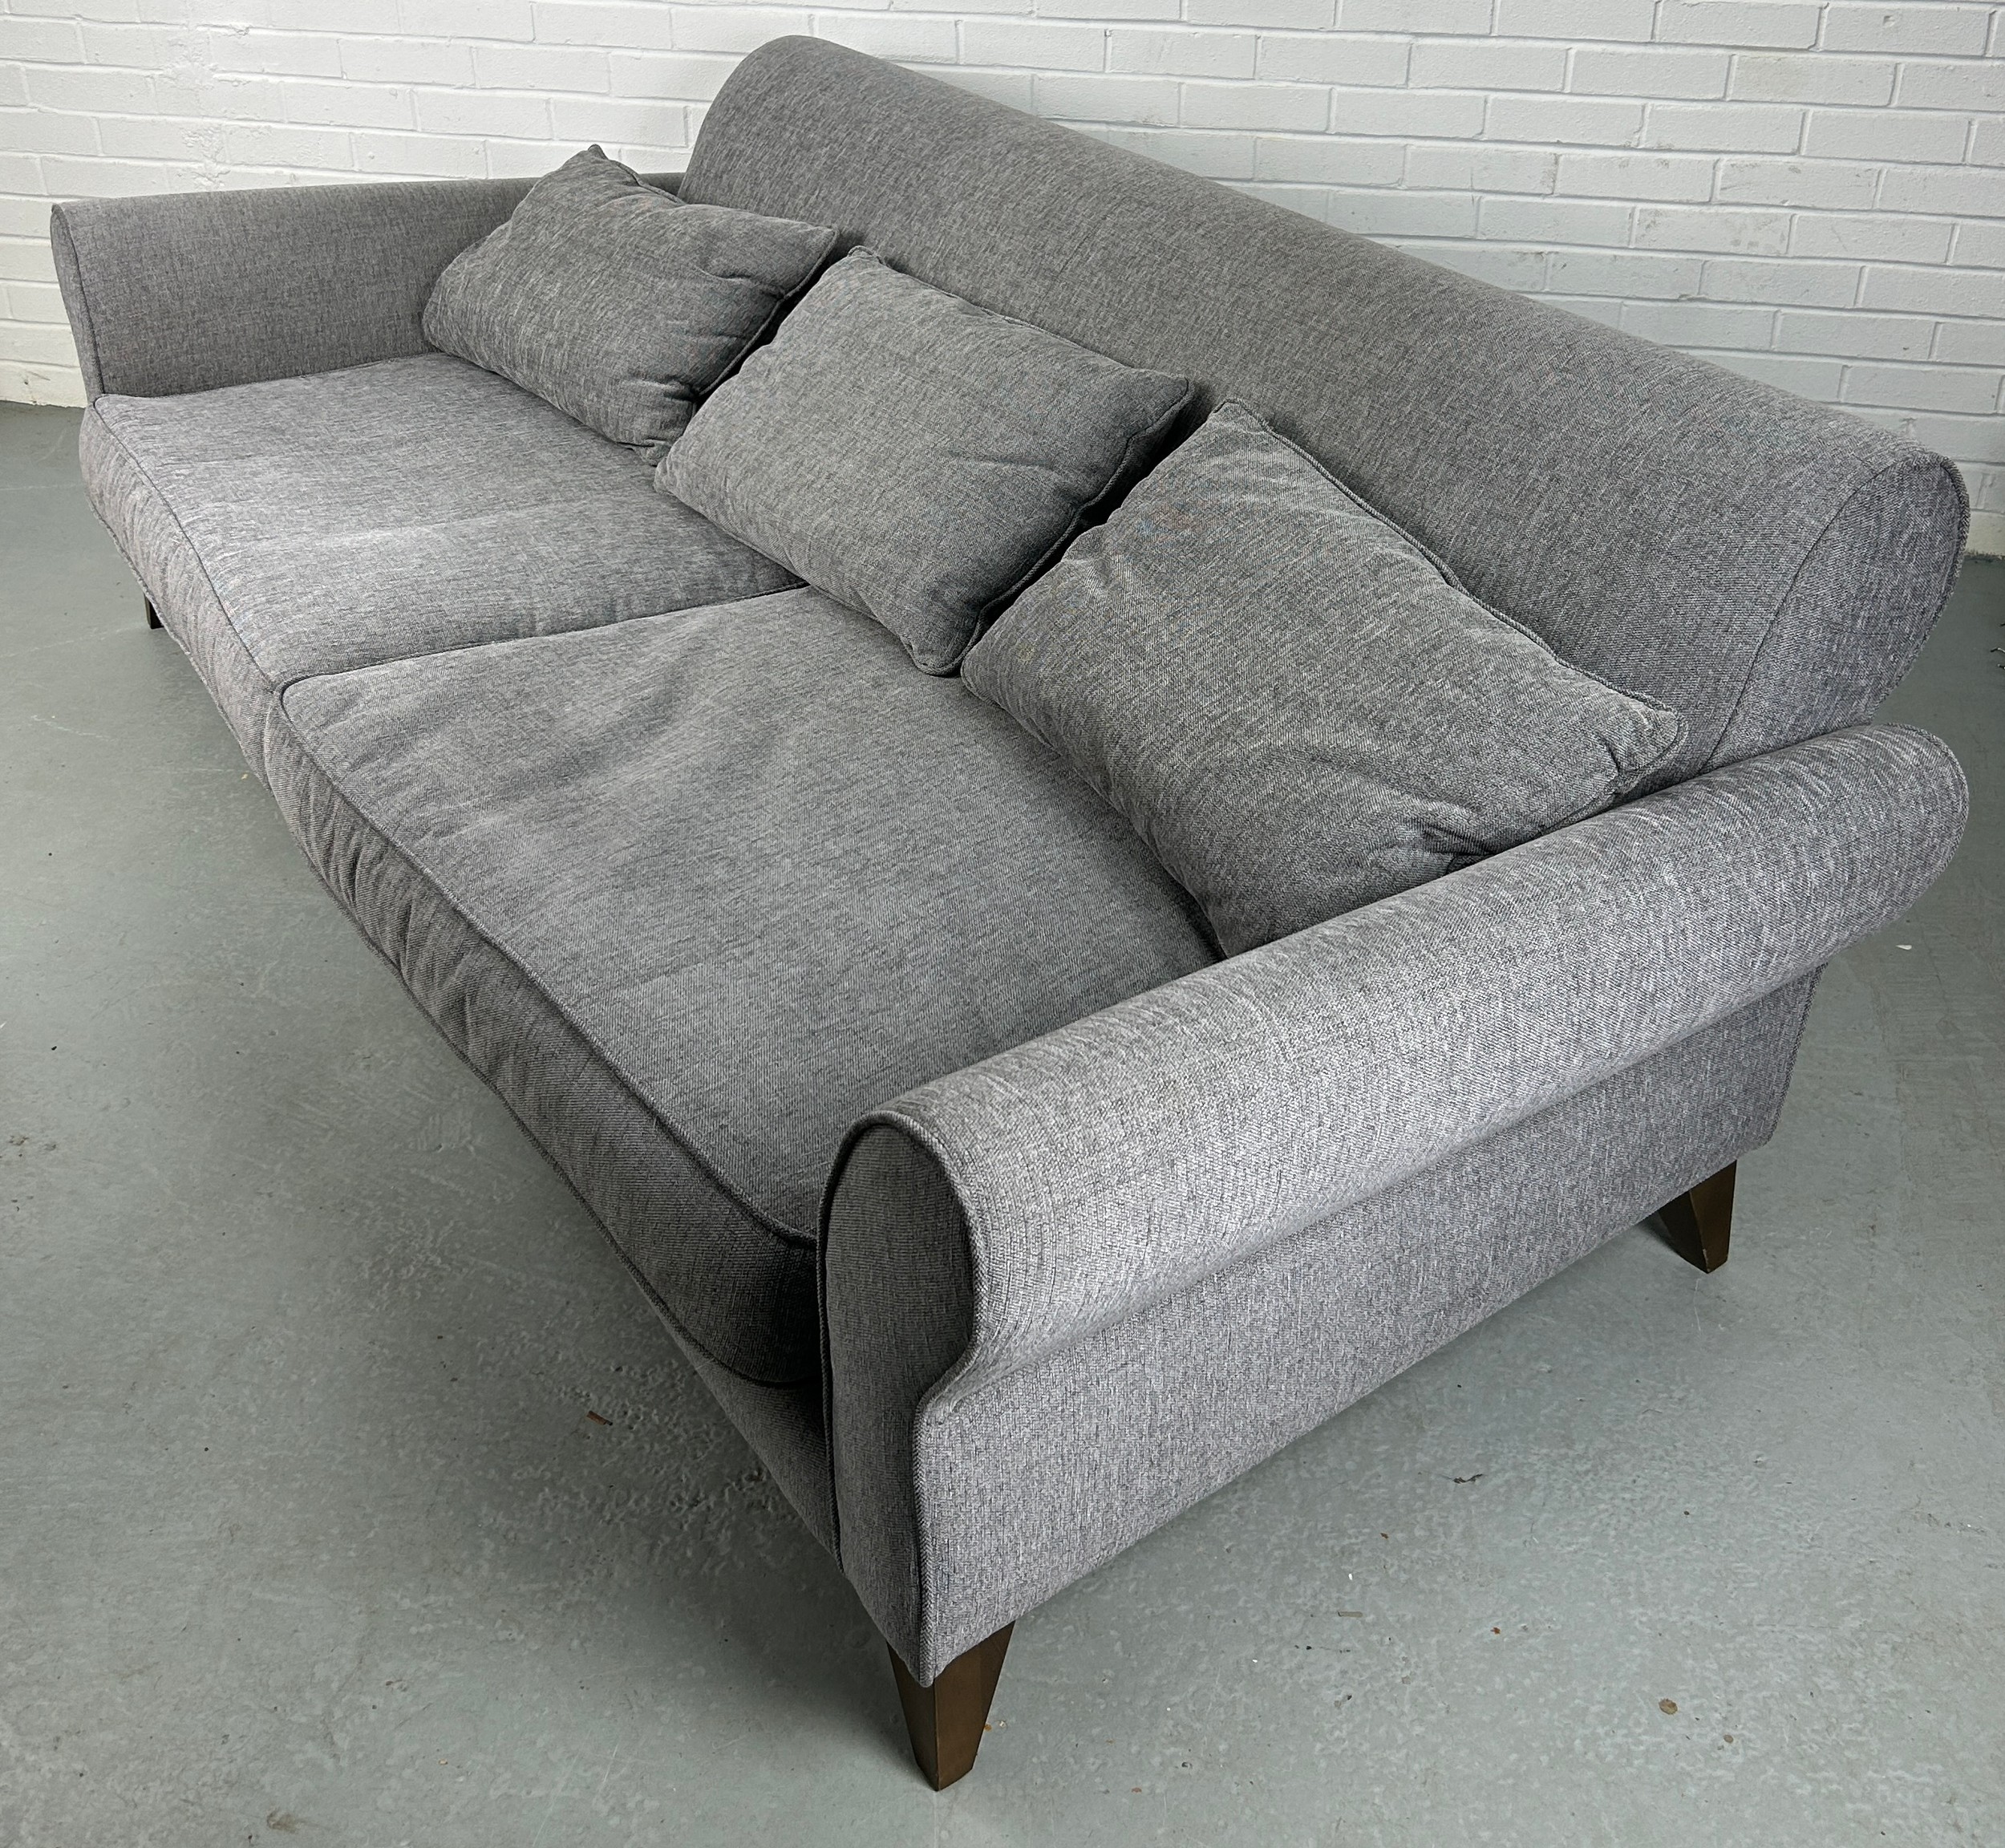 A 'CONTENT' BY CONRAN GREY UPHOLSTERED TWO SEATER SOFA, 246cm x 117cm x 77cm - Image 3 of 8